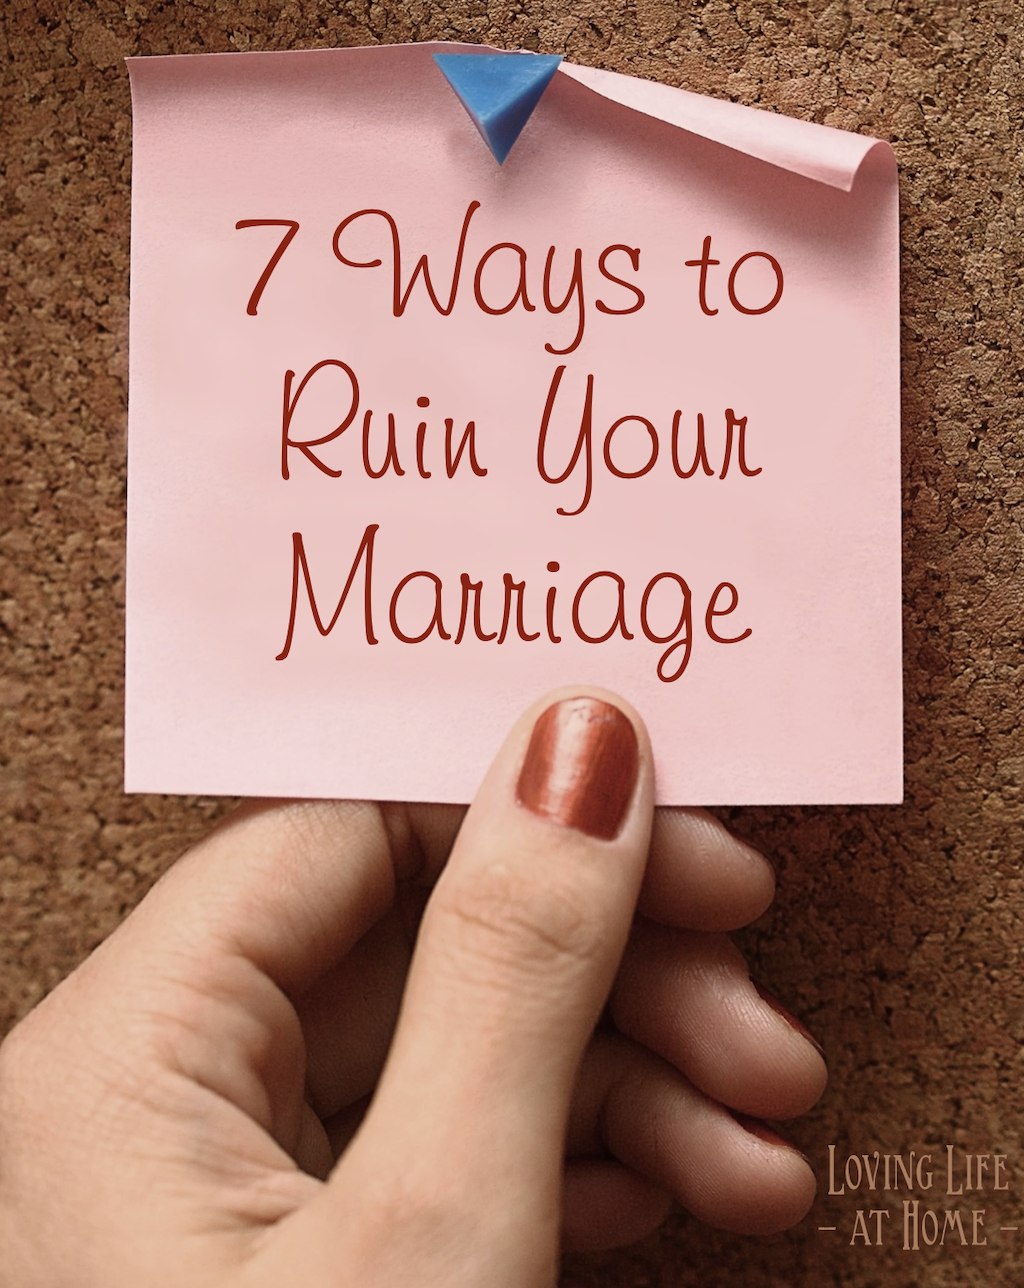 7 Ways to Ruin Your Marriage